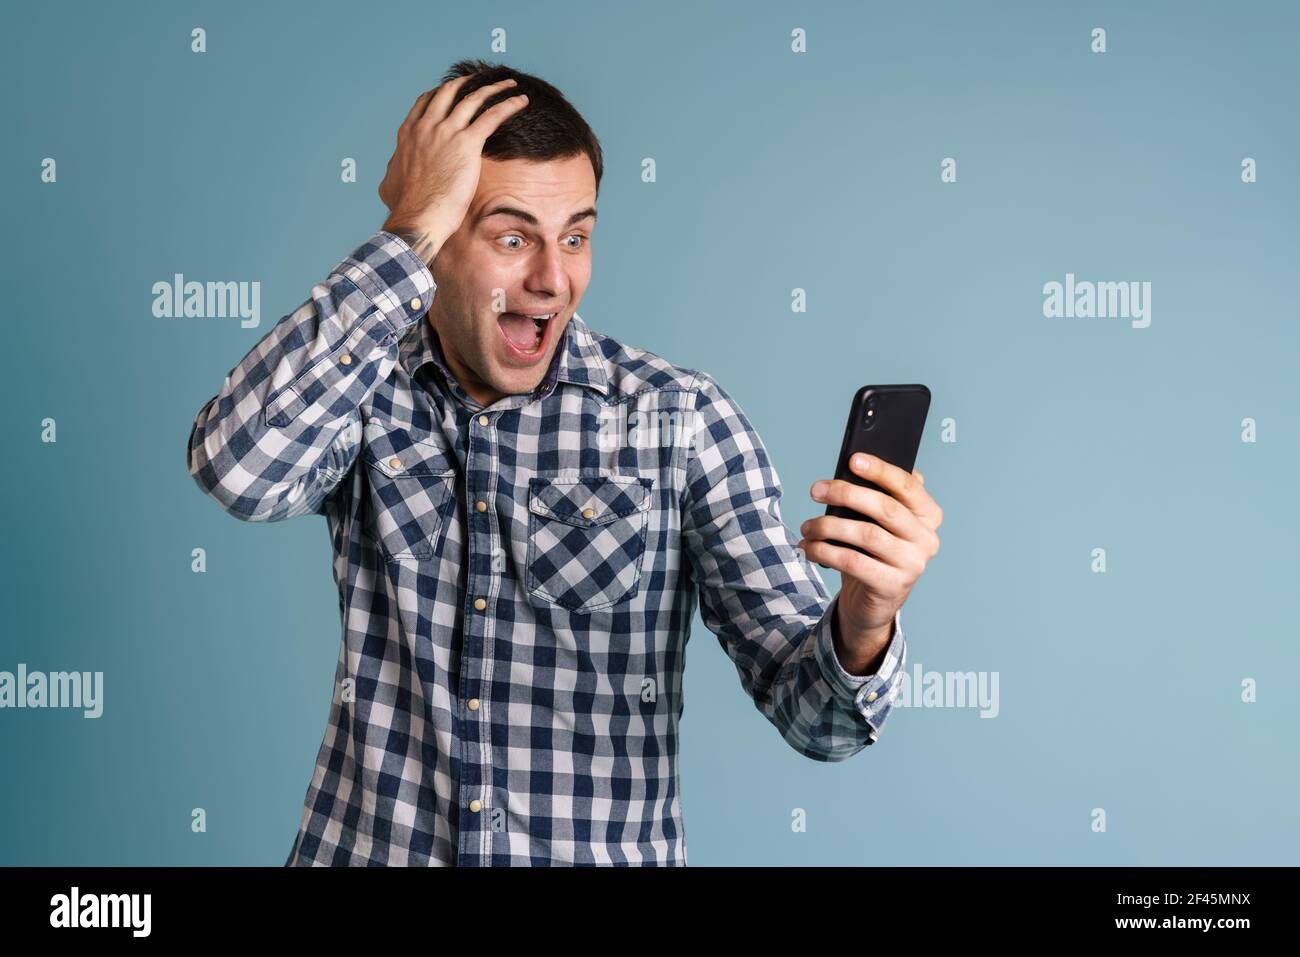 Handsome young man using mobile phone isolated over blue backround Stock Photo